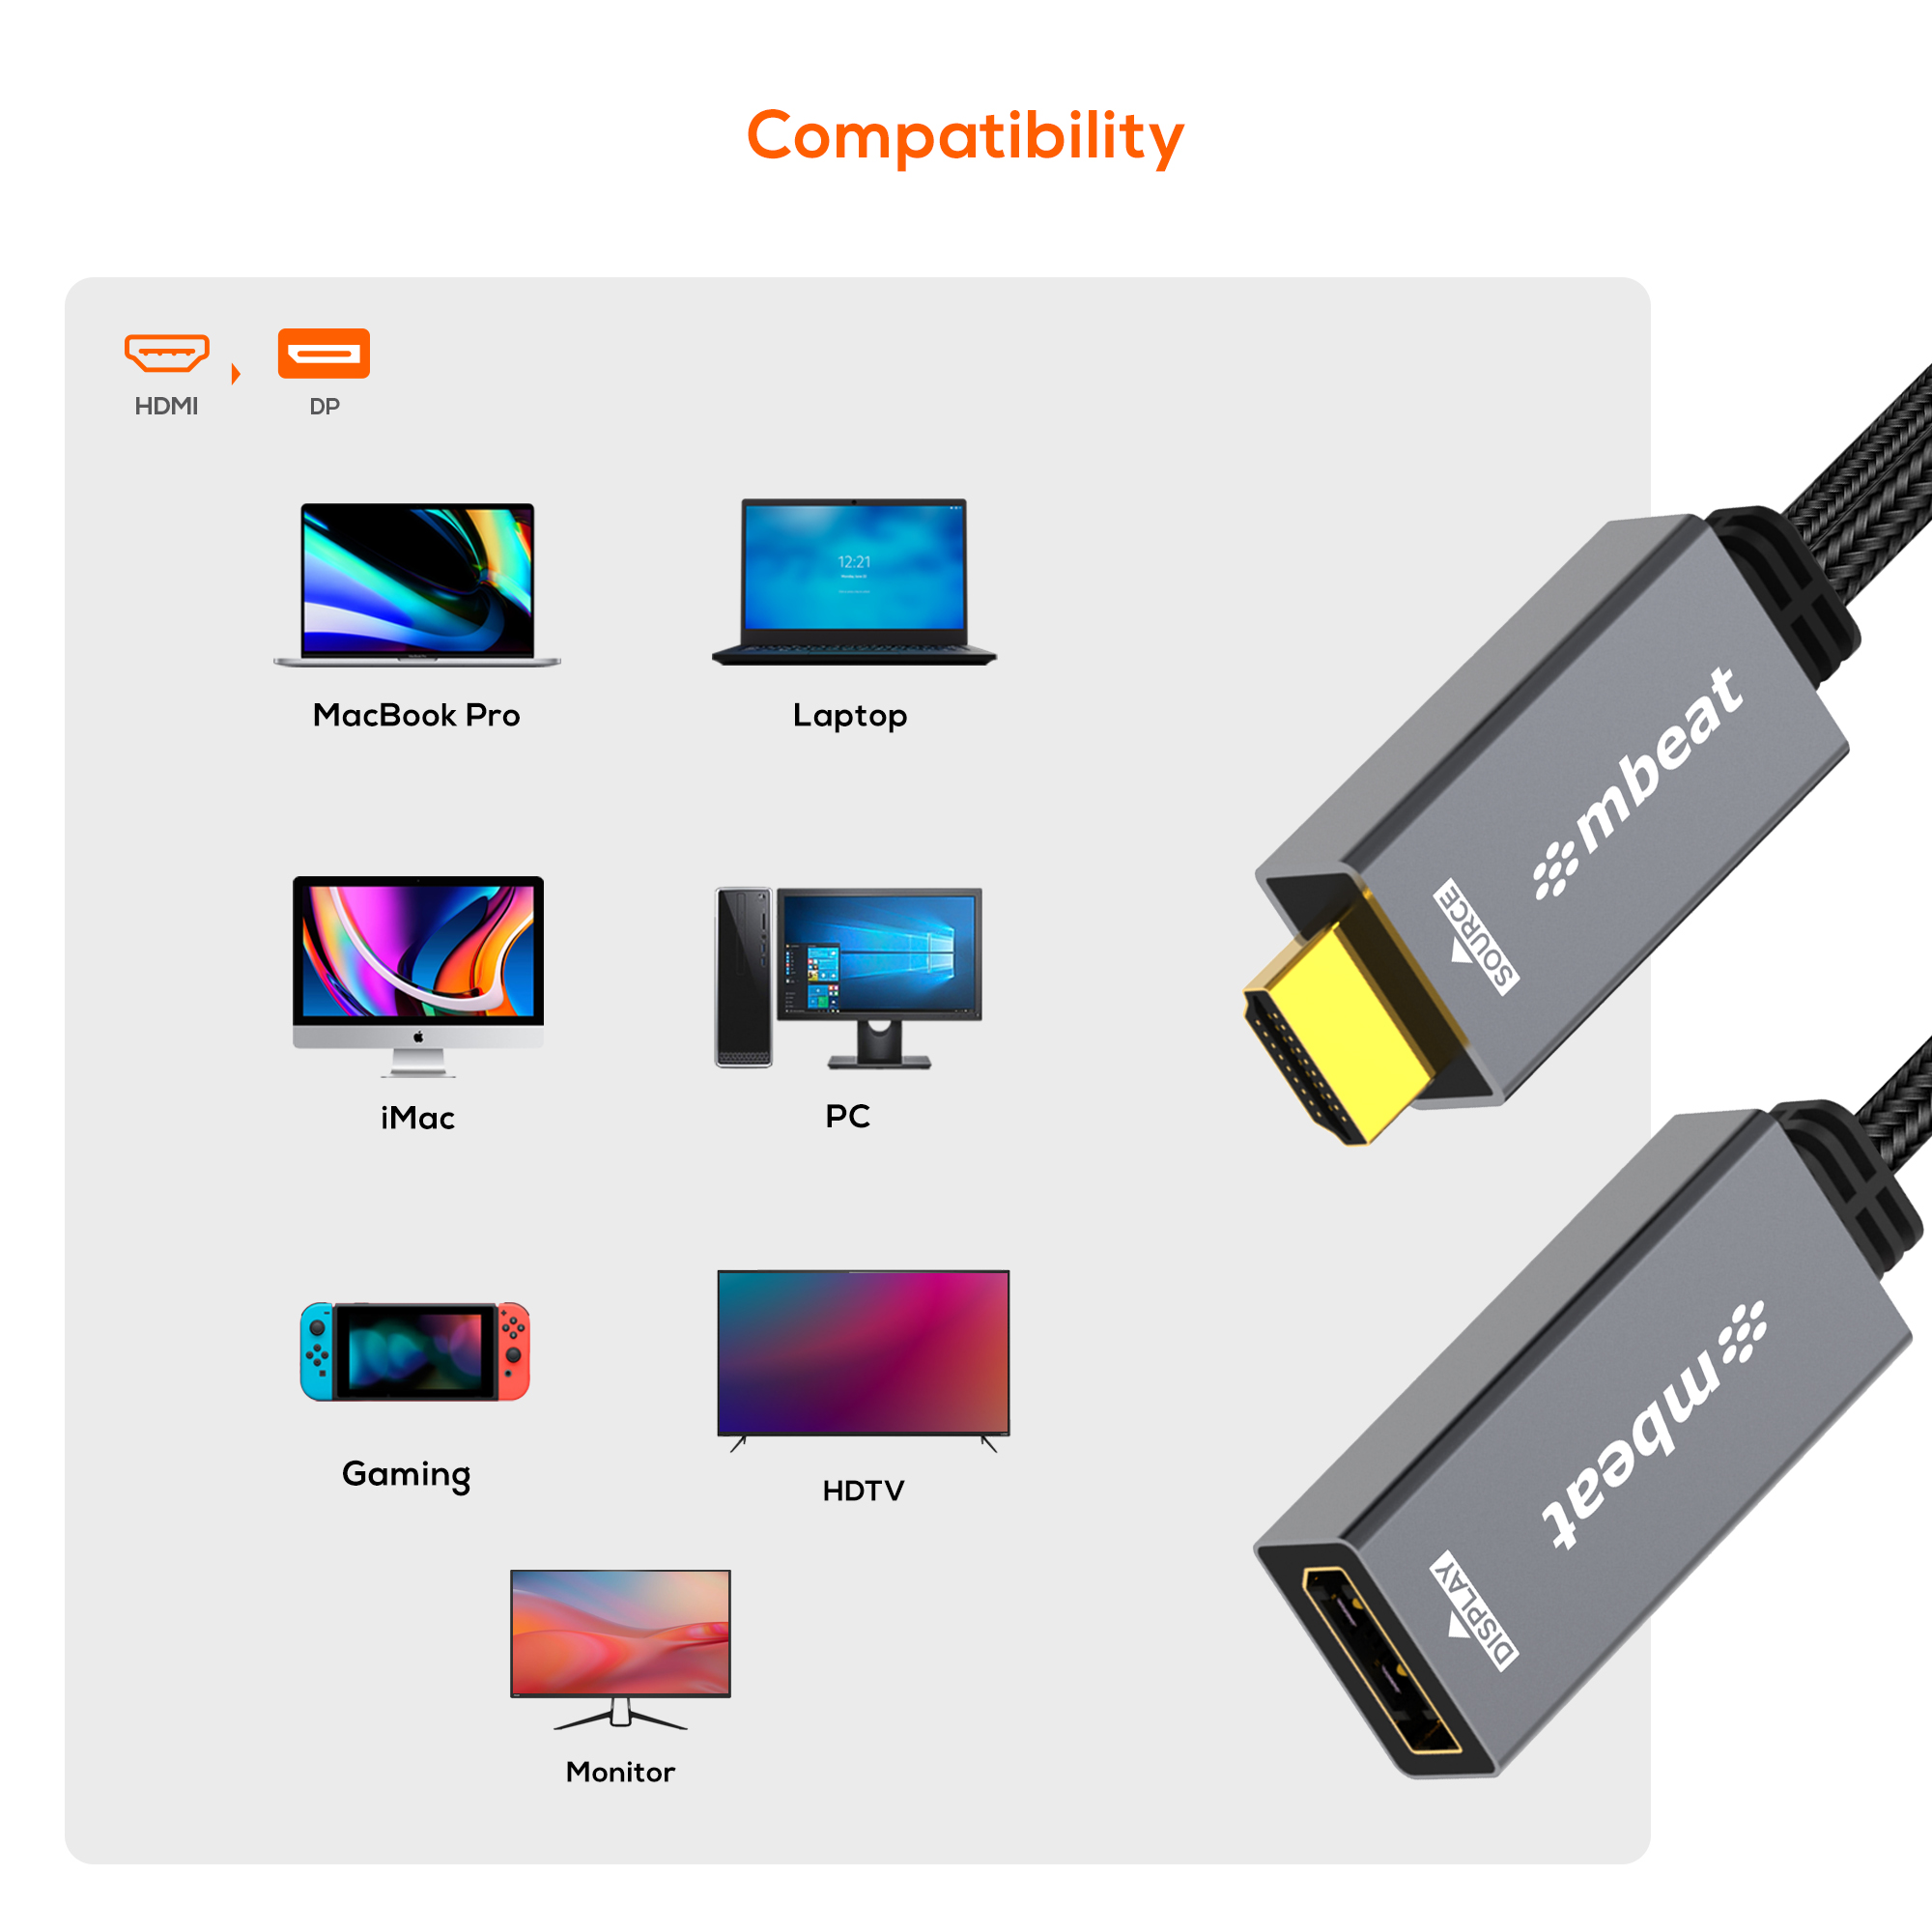 A large marketing image providing additional information about the product mbeat Tough Link HDMI to DisplayPort Adapter with USB Power - Additional alt info not provided